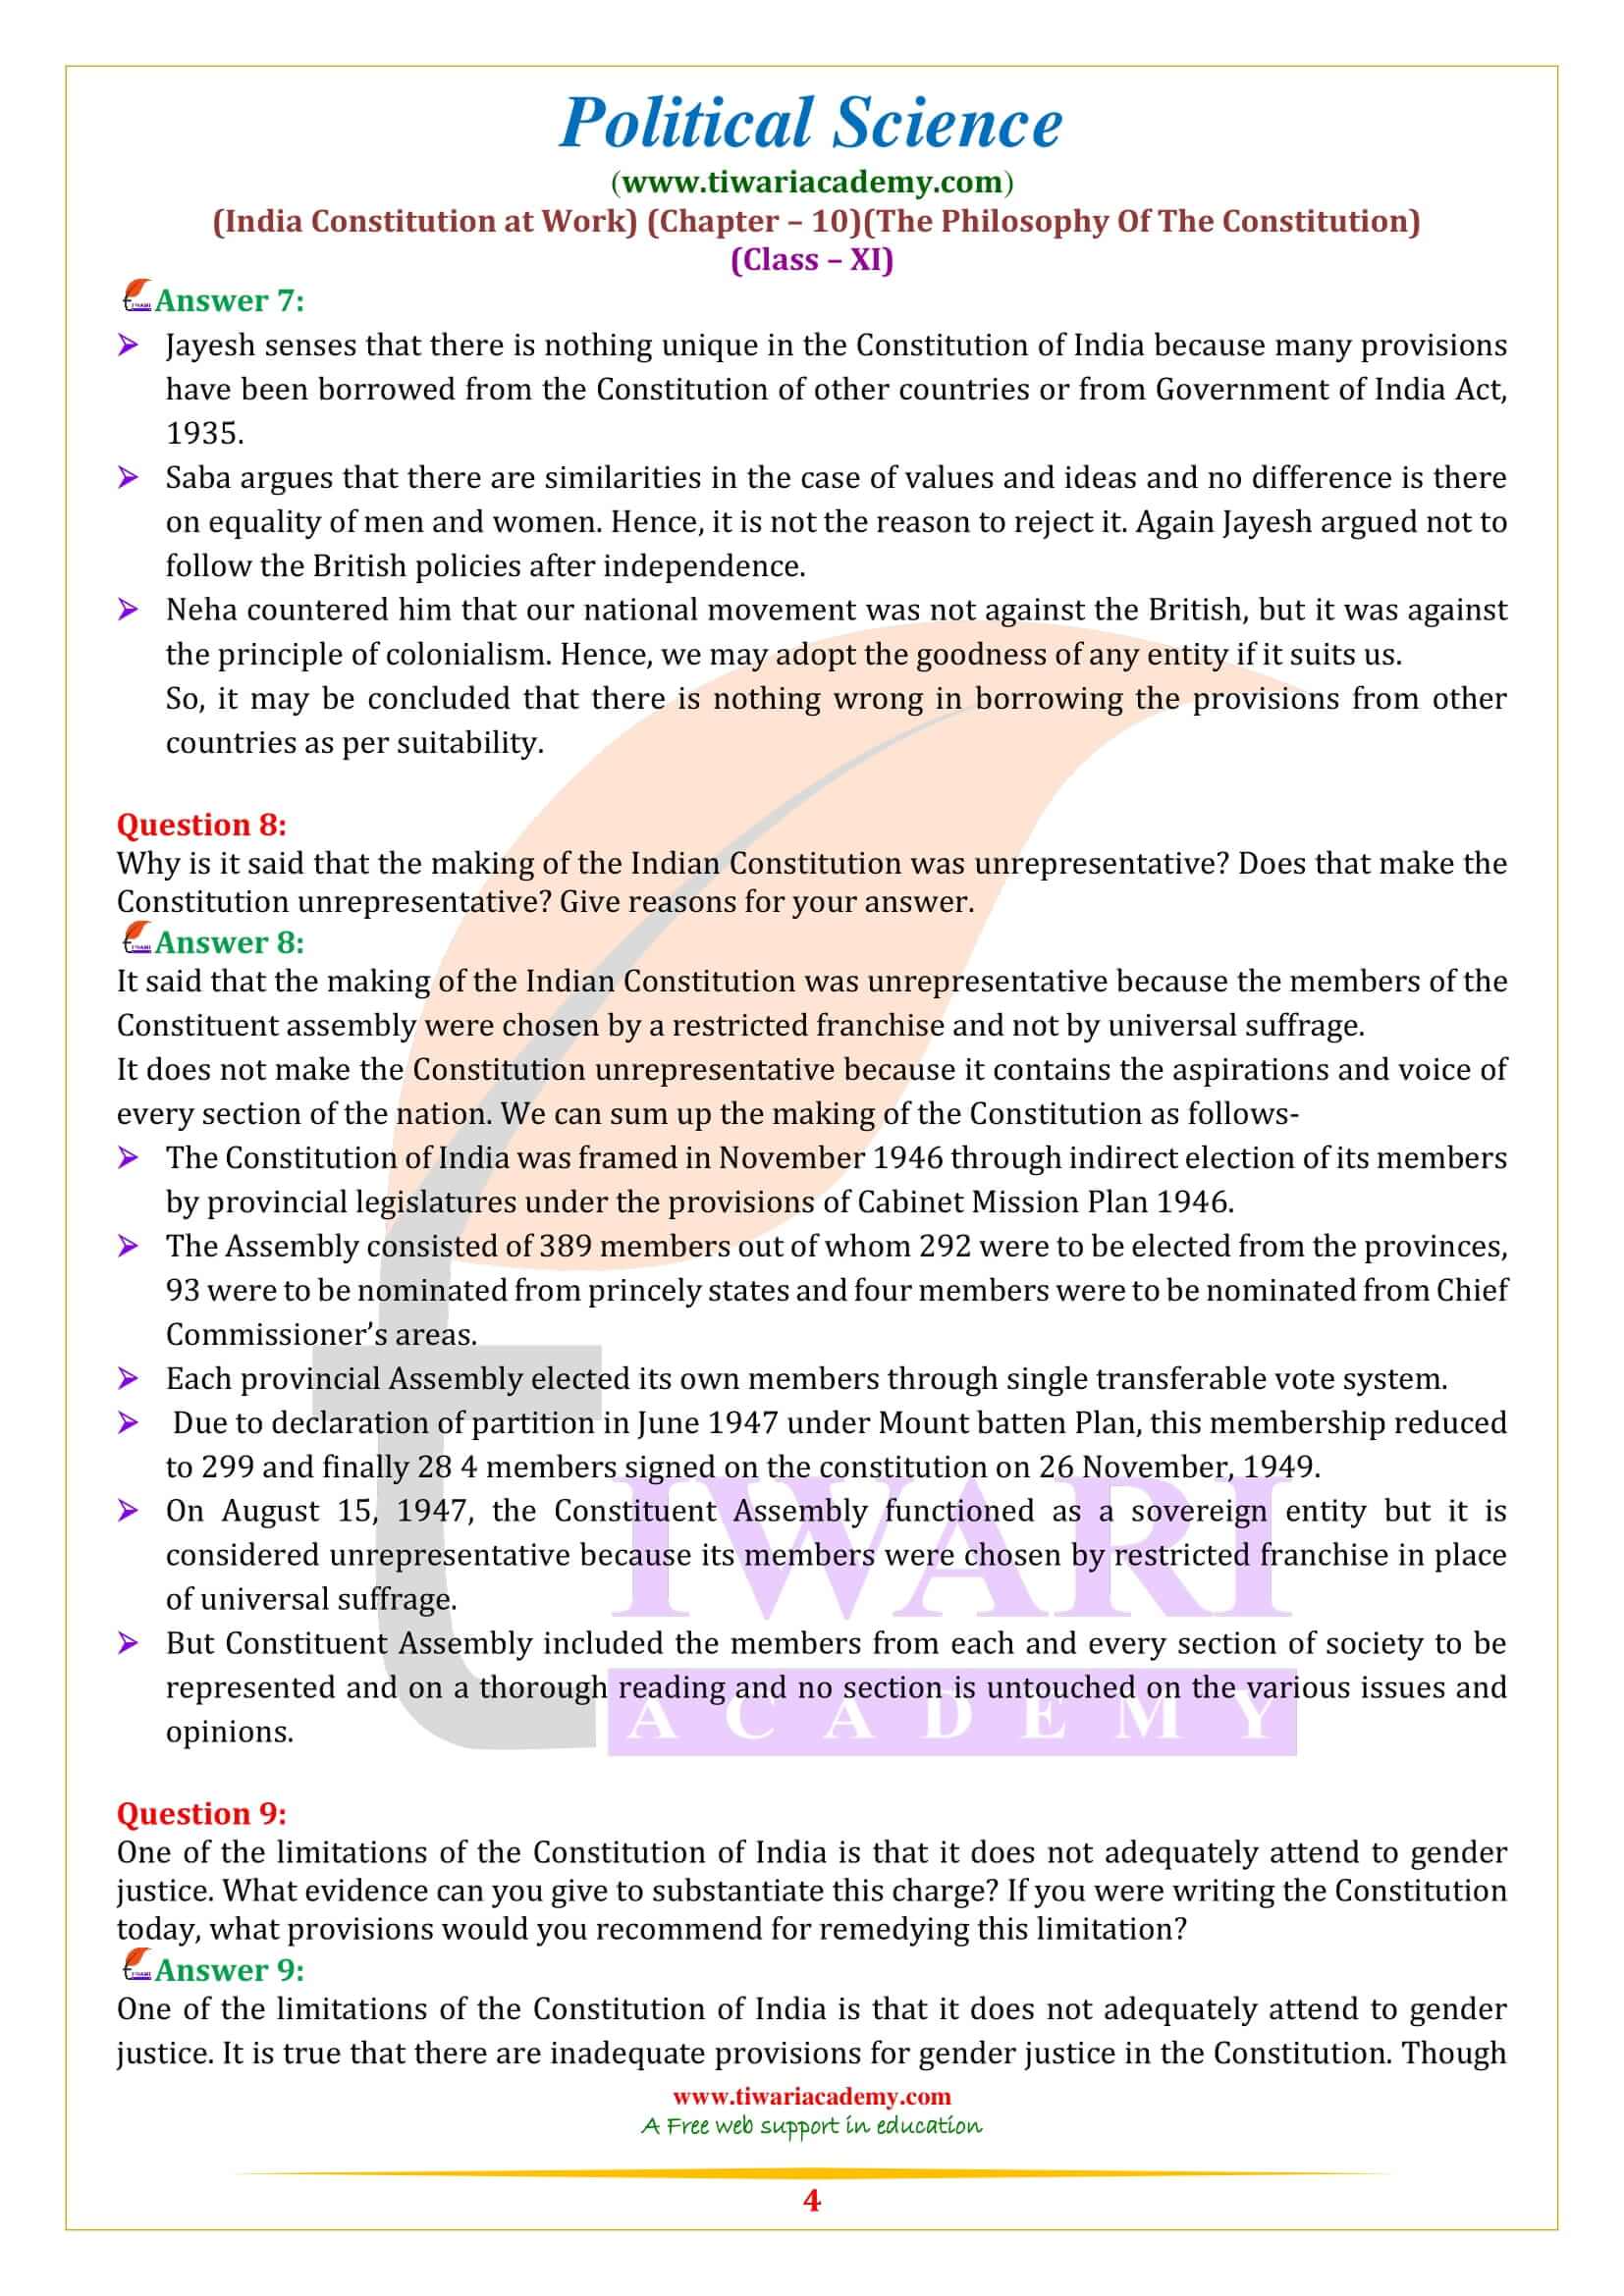 NCERT Solutions for Class 11 Political Science Chapter 10 in English Medium